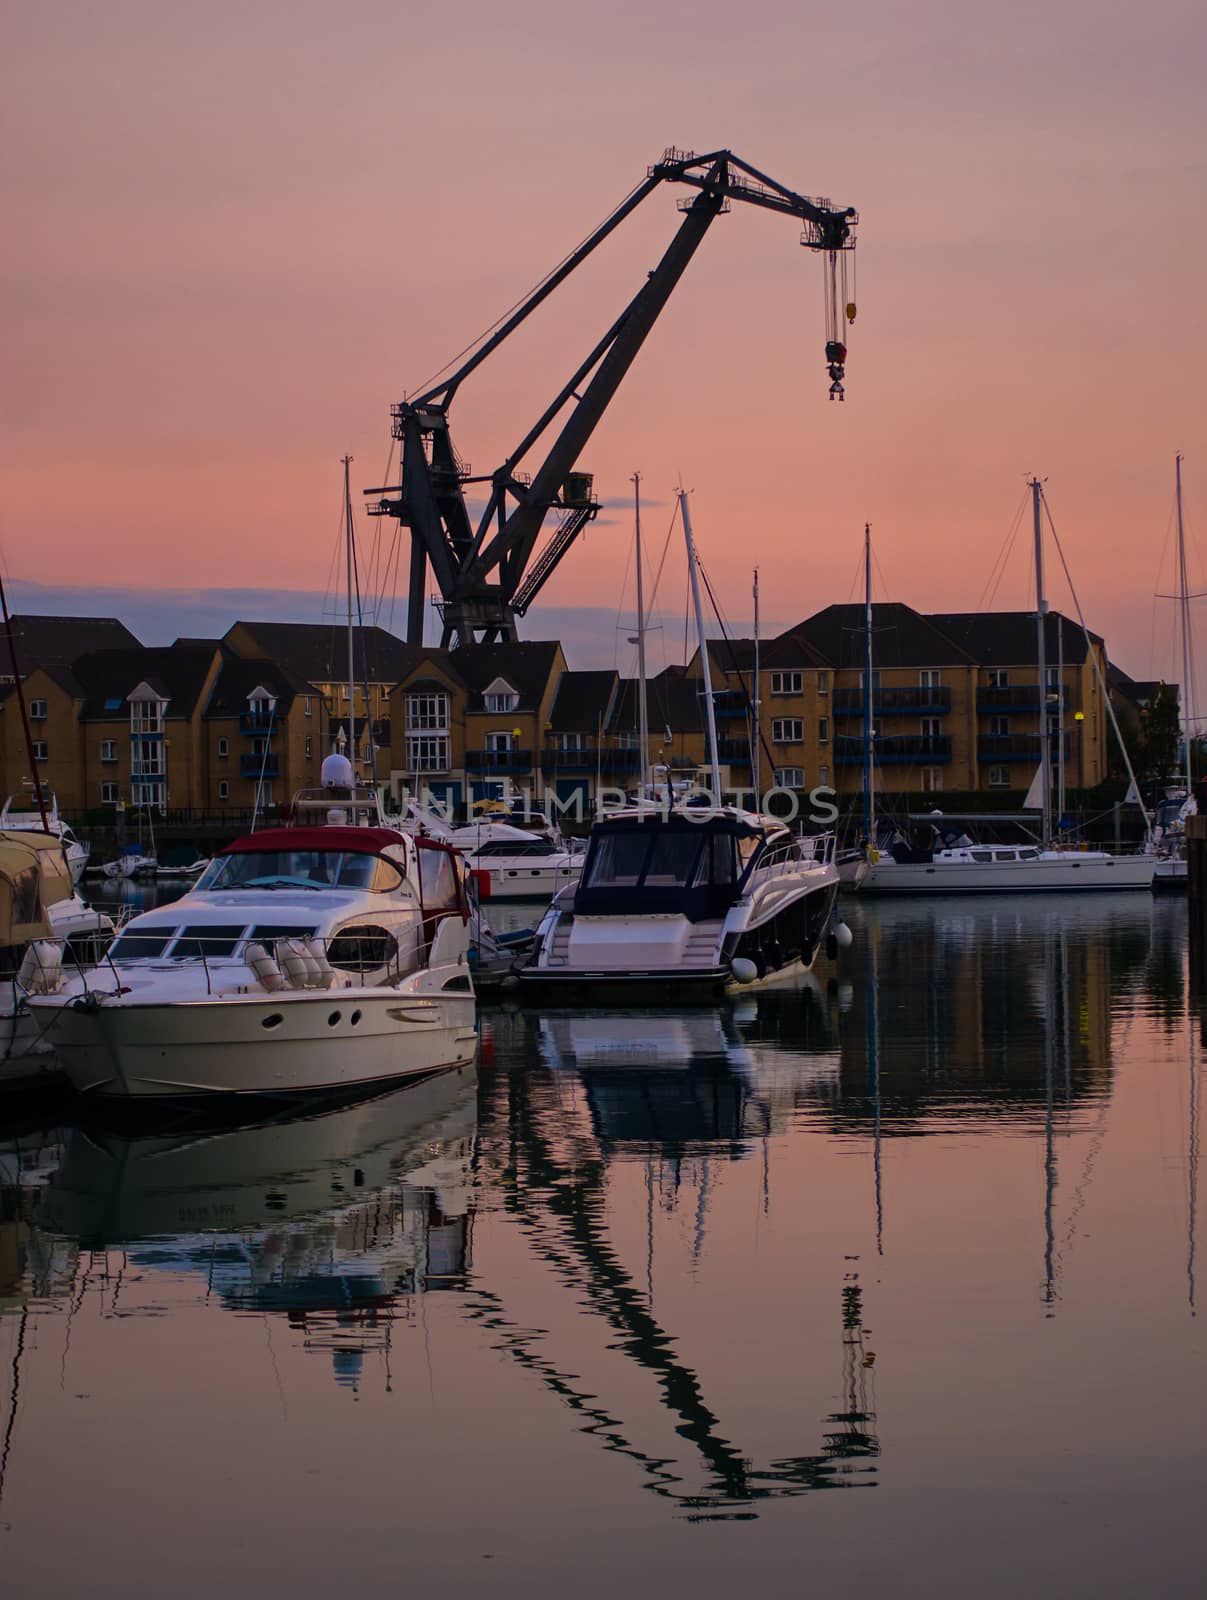 A dockside crane and boats, silhouetted against the setting sun